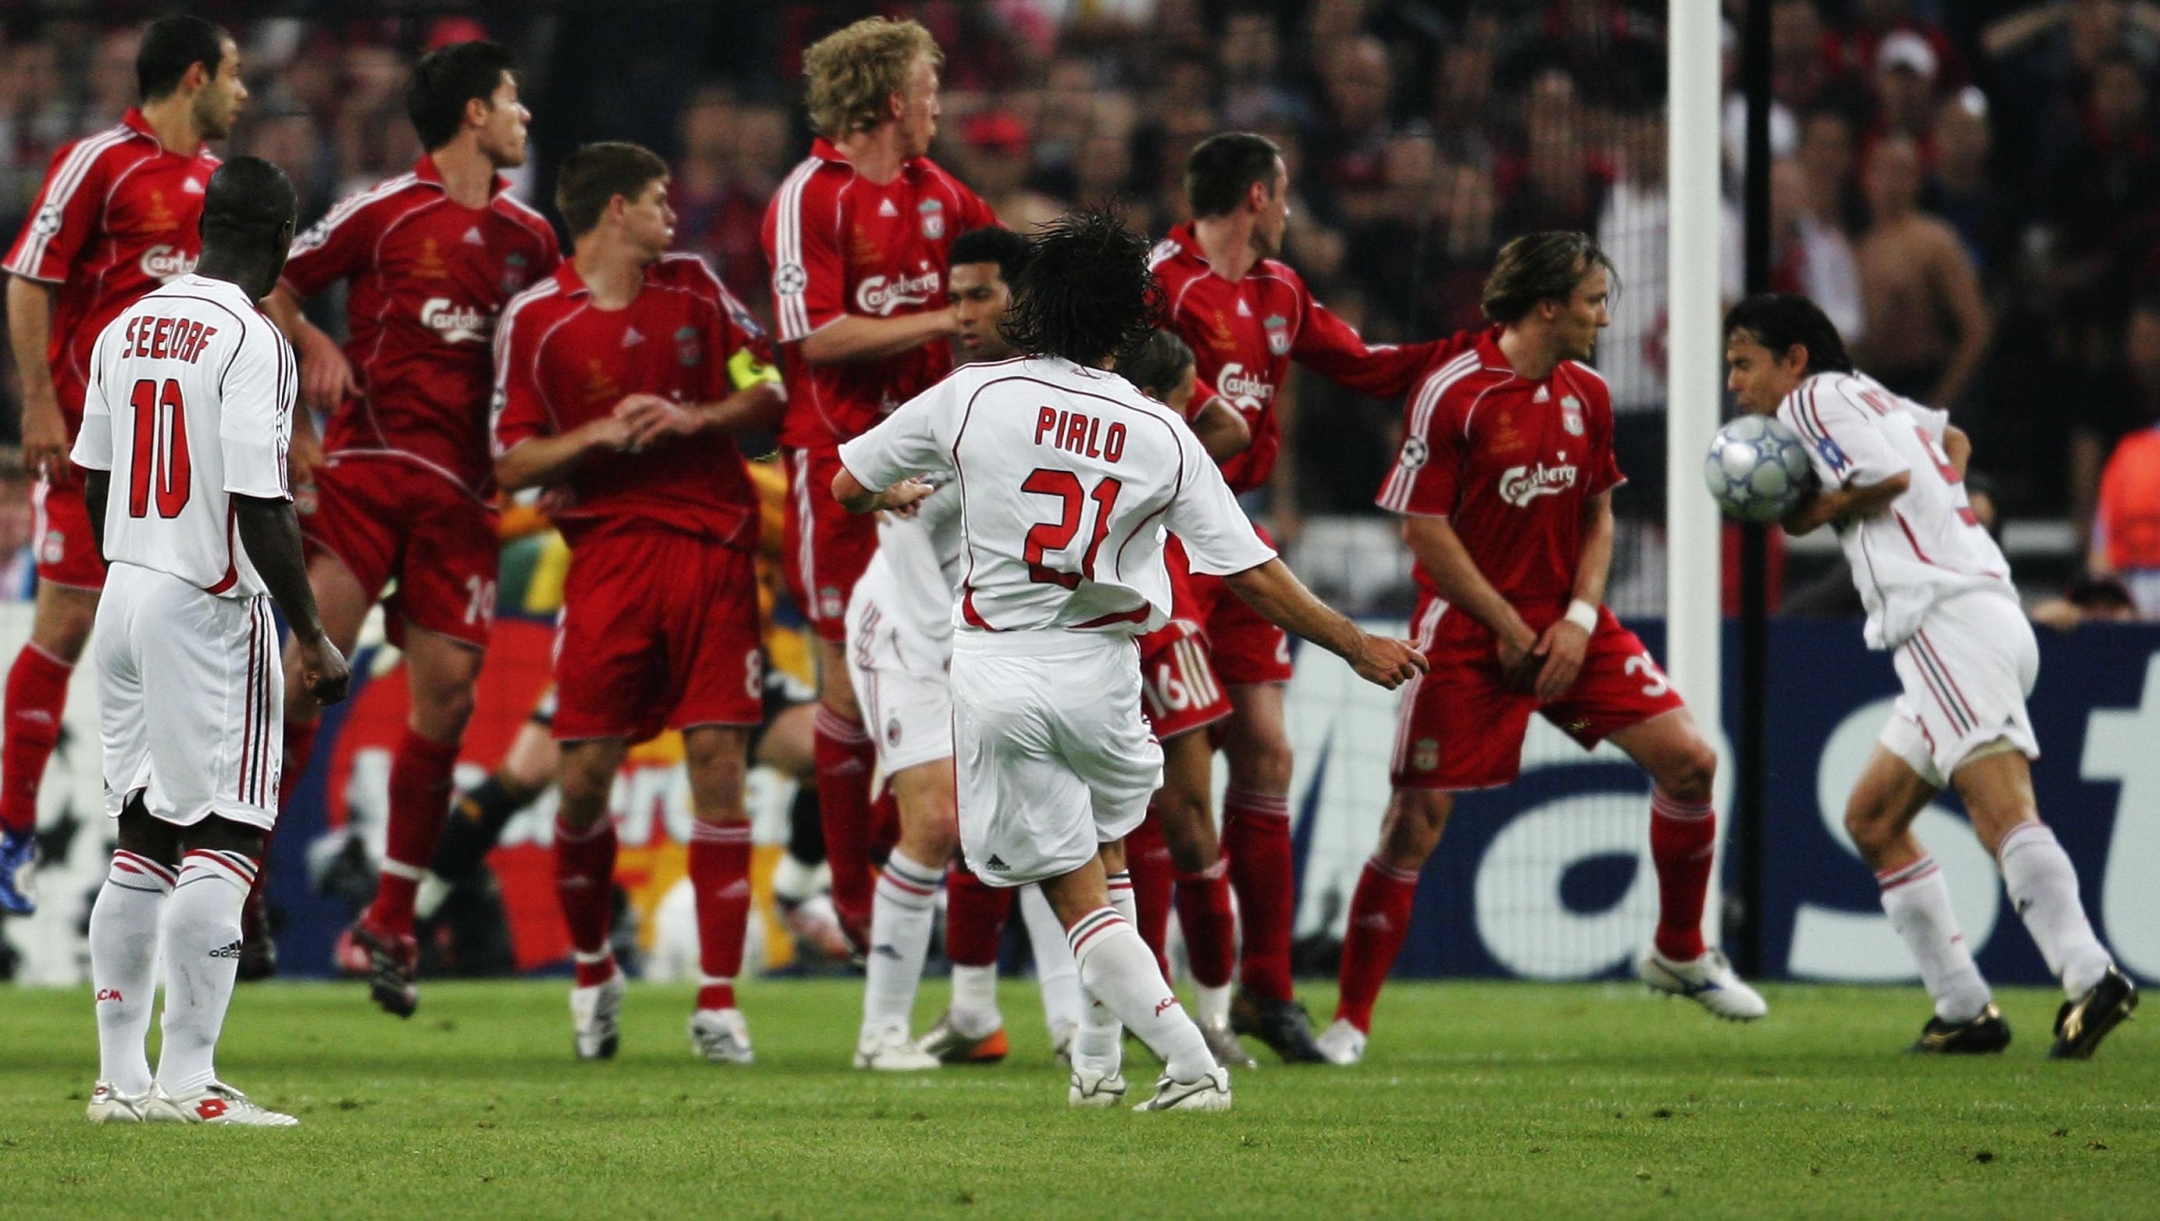 during the UEFA Champions League Final match between Liverpool and AC Milan at the Olympic Stadium on May 23, 2007 in Athens, Greece.